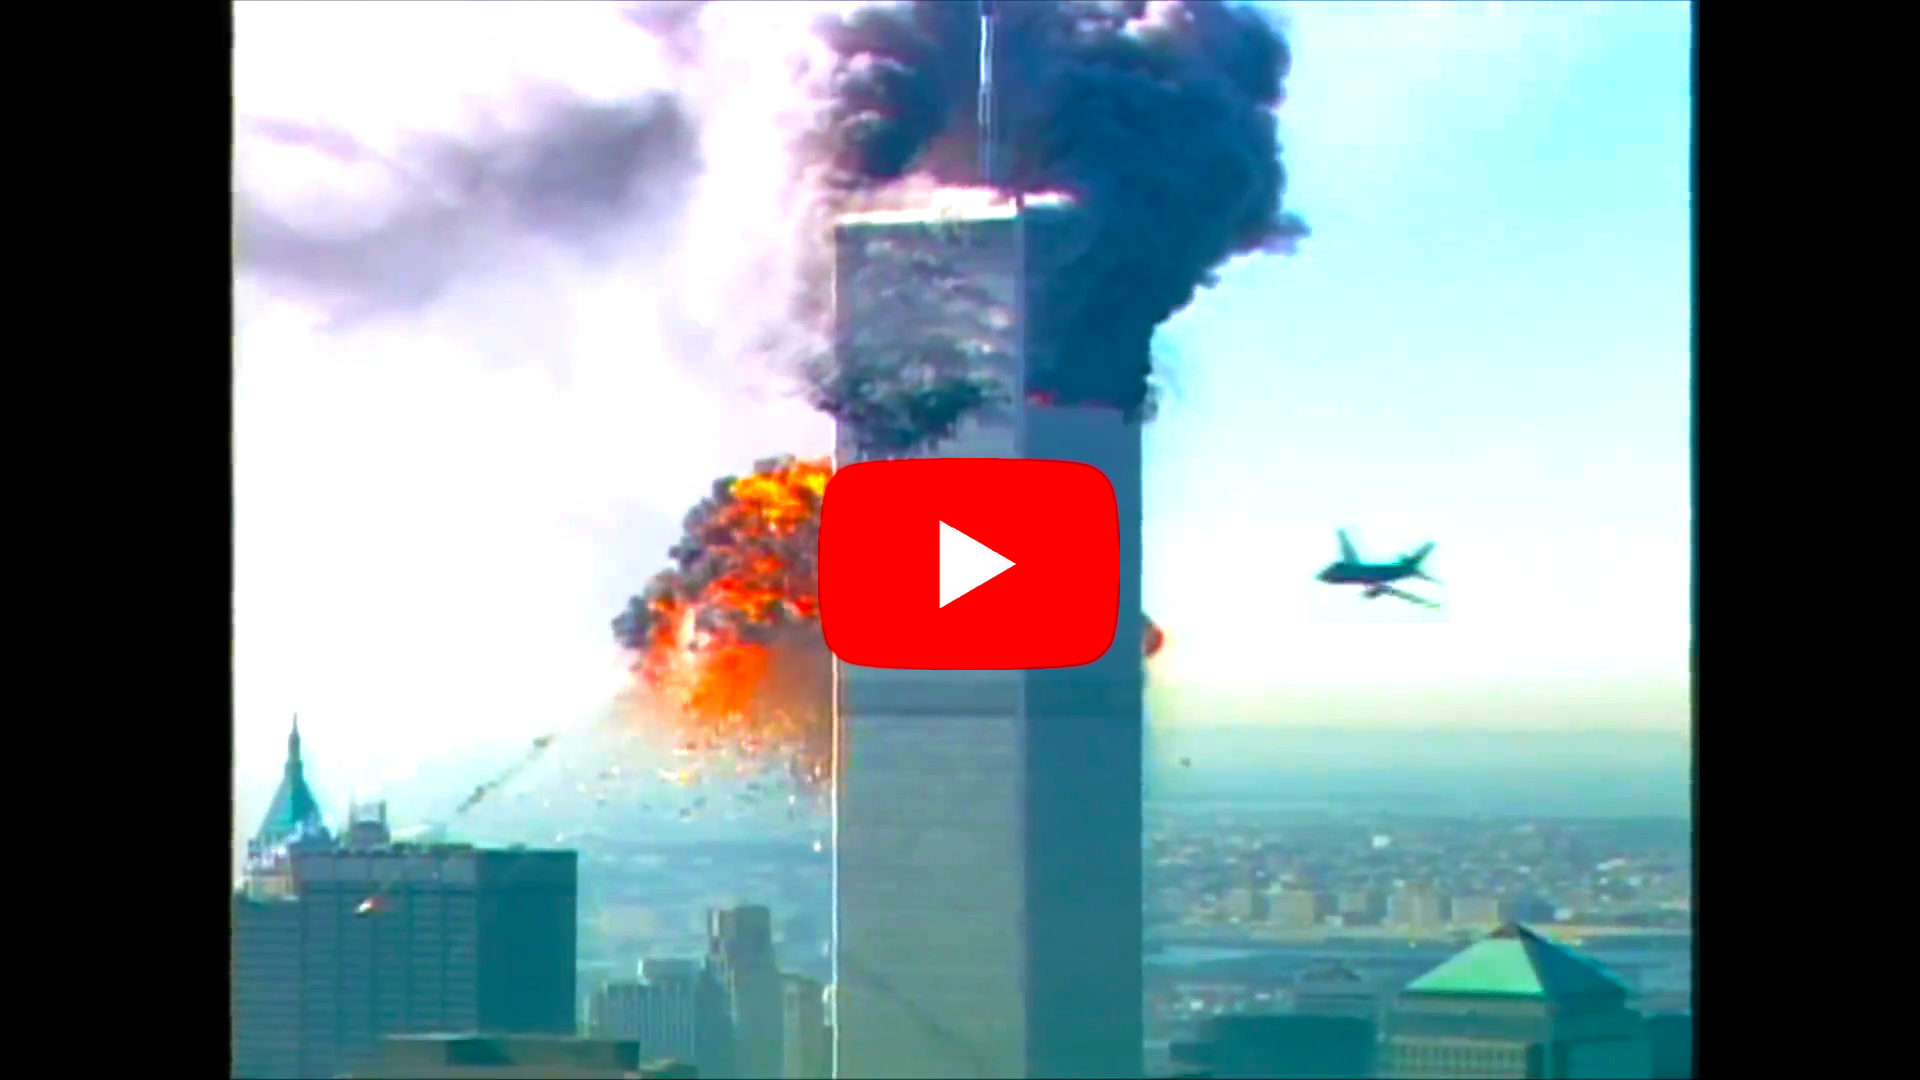 Hoax video falsely purports to show no planes hit Twin Towers on 9/11